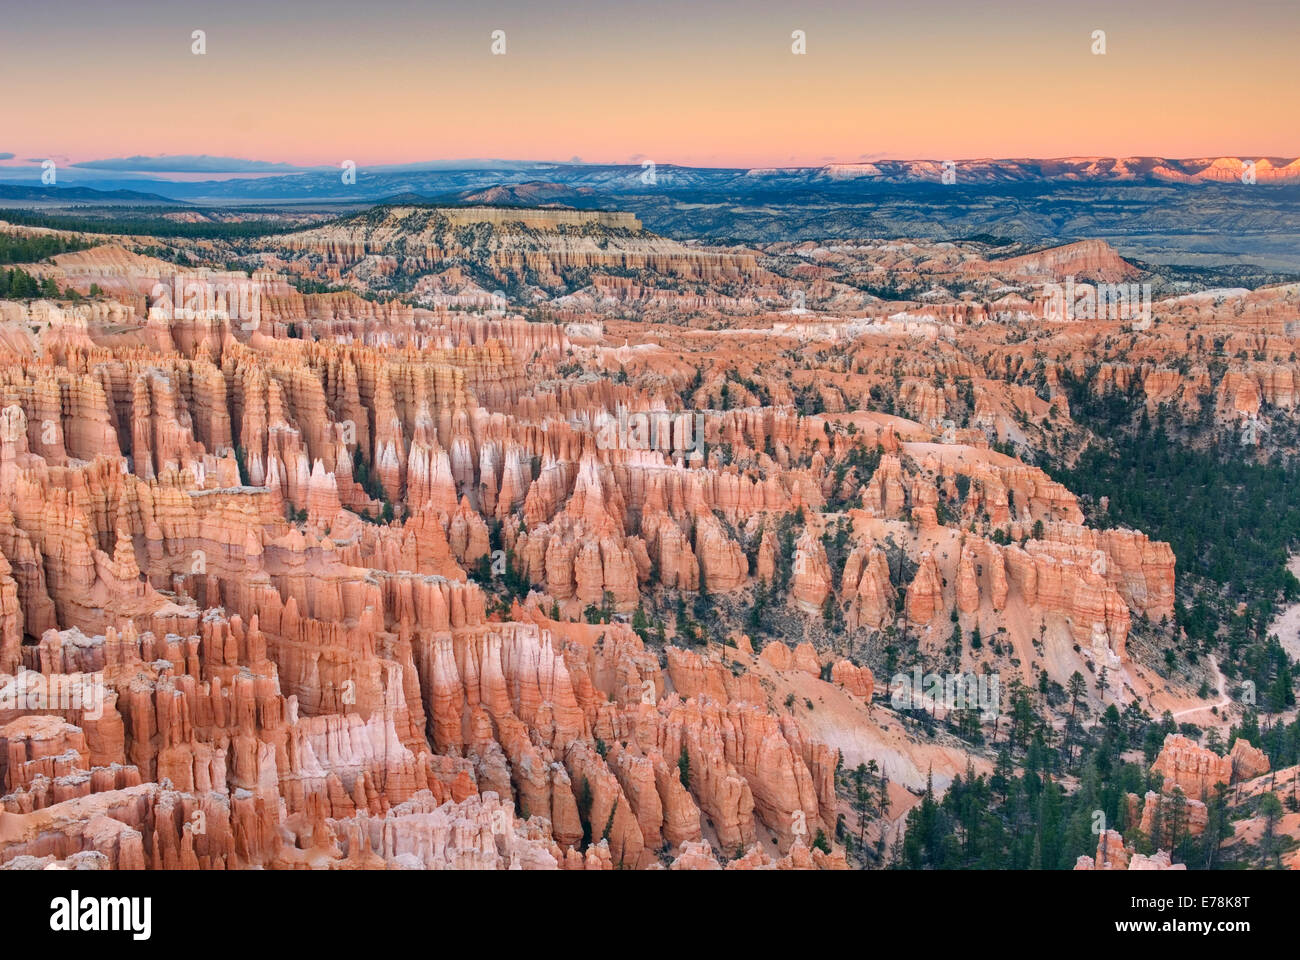 Alpenglow over Bryce Canyon from Bryce Point, Bryce Canyon National Park Utah Stock Photo